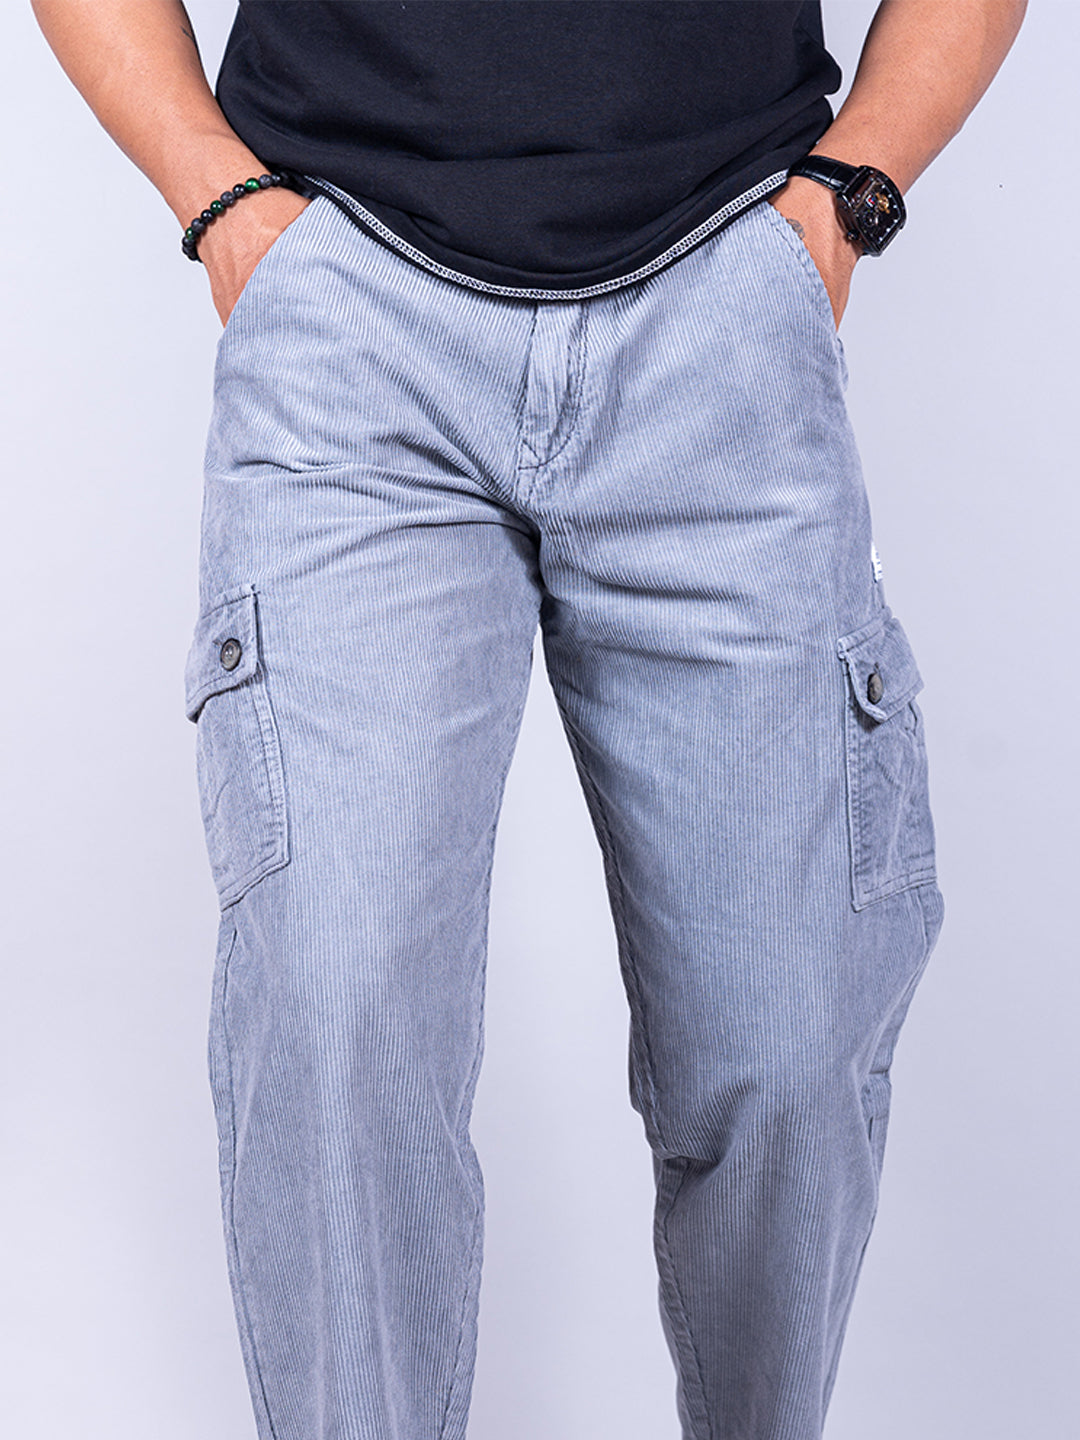 Mens New Cargo Jeans Soft Denim Cargo Pants Relaxed Fit 6 Pockets Sizes  32-46 | eBay